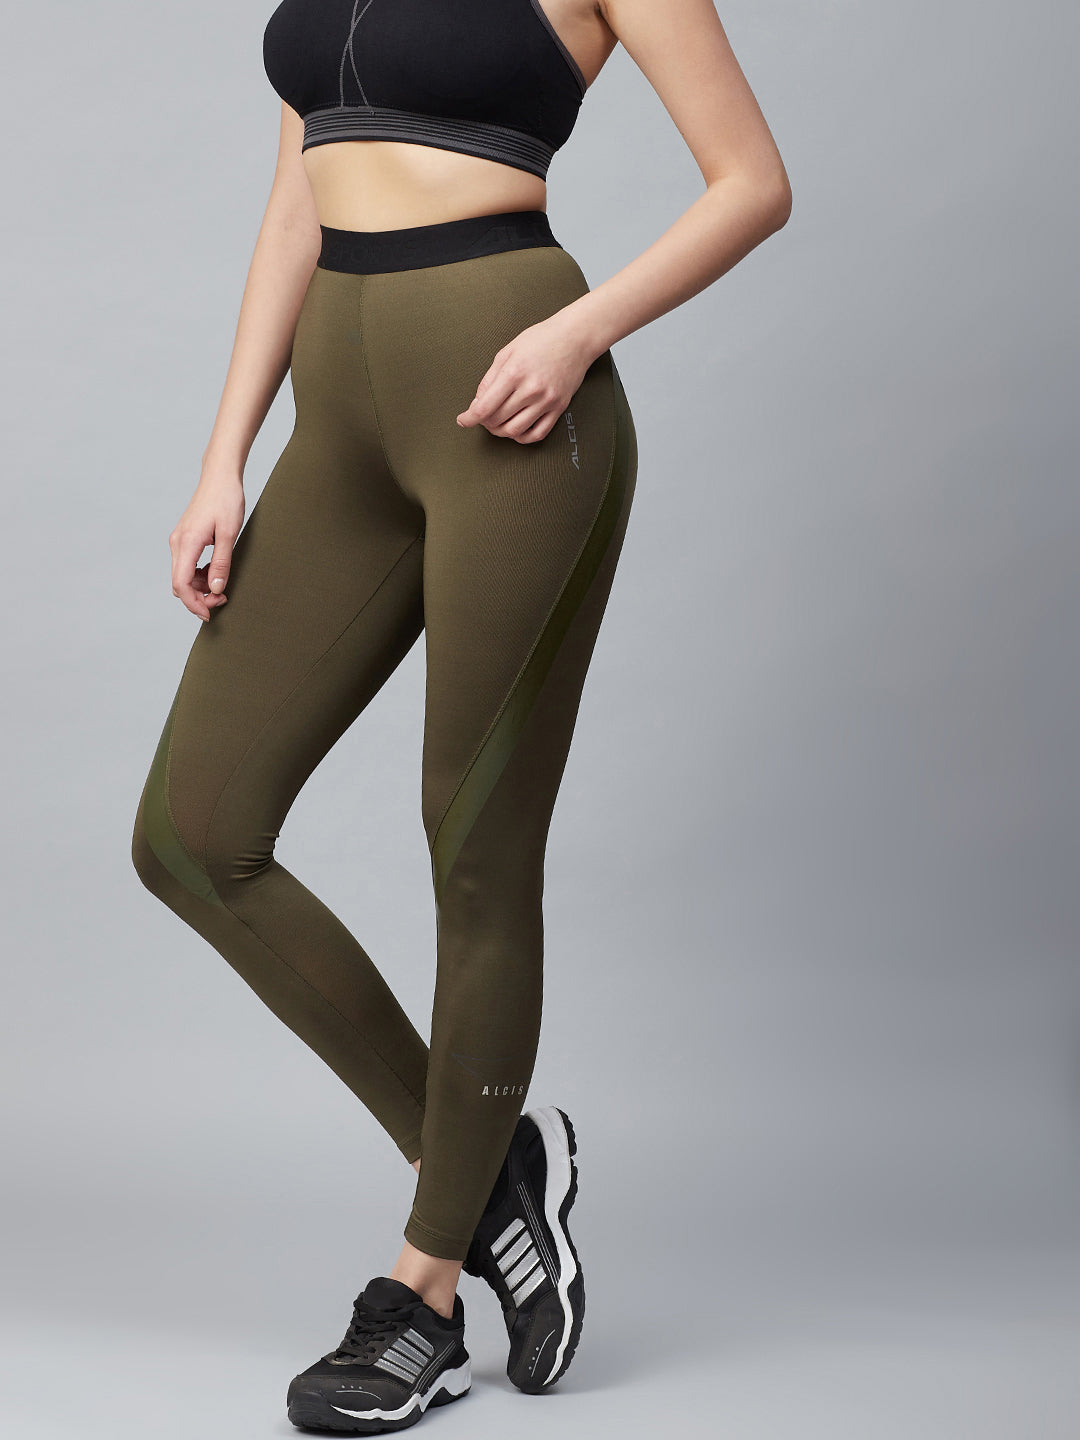 Buy Go Colors Women Solid Dusty Green Slim Fit Ankle Length Leggings - Tall  online